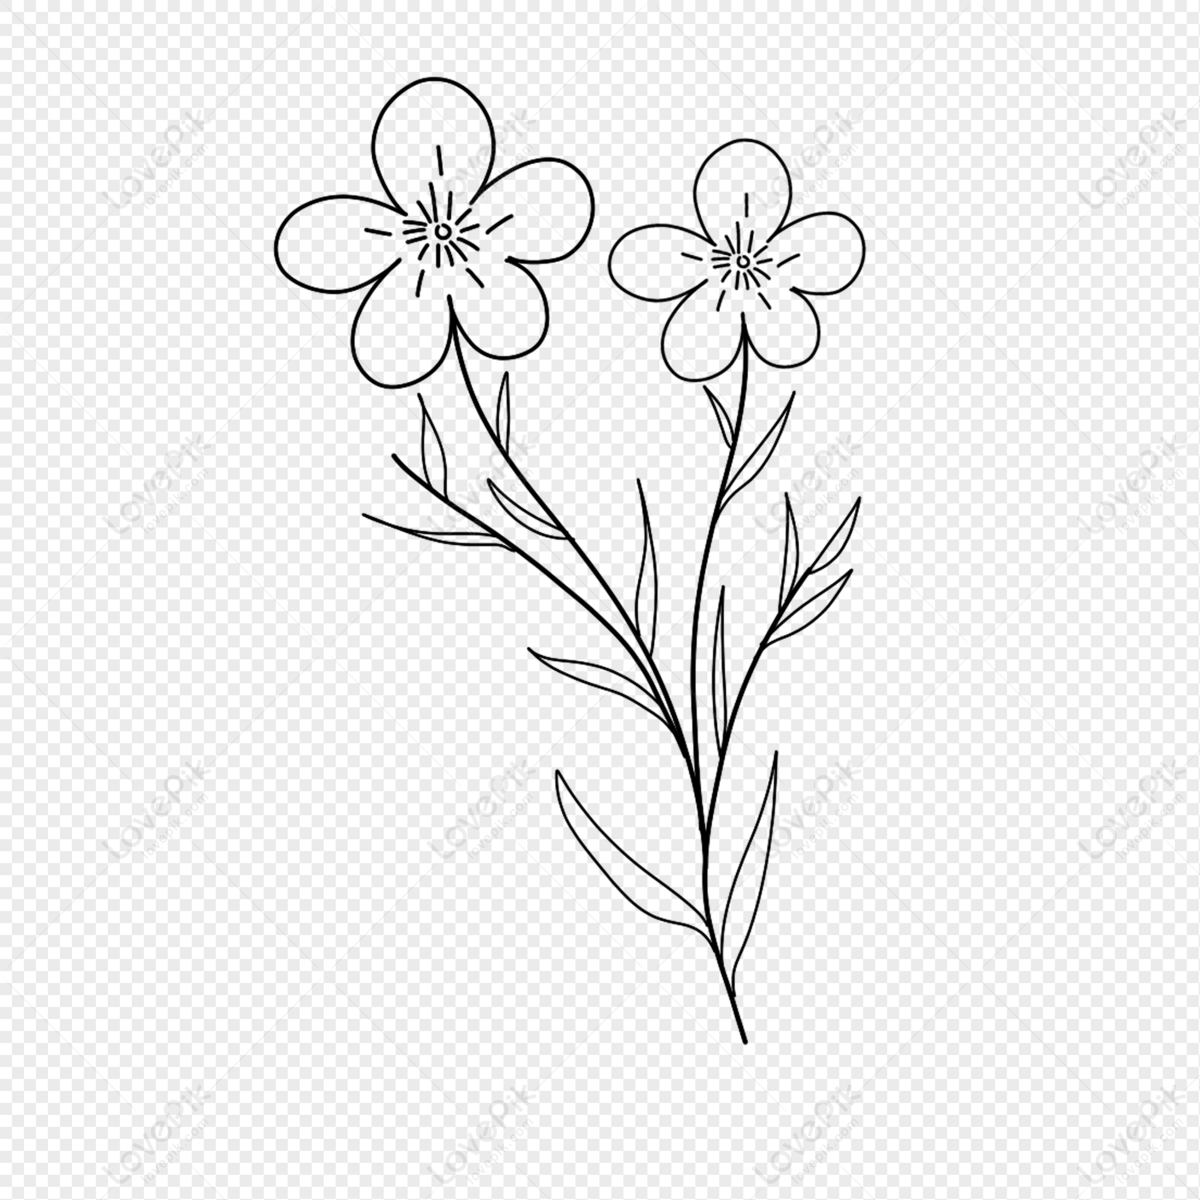 Flower Stick Figure, Stick Figure, Green Plant, Blossom Drawing PNG ...